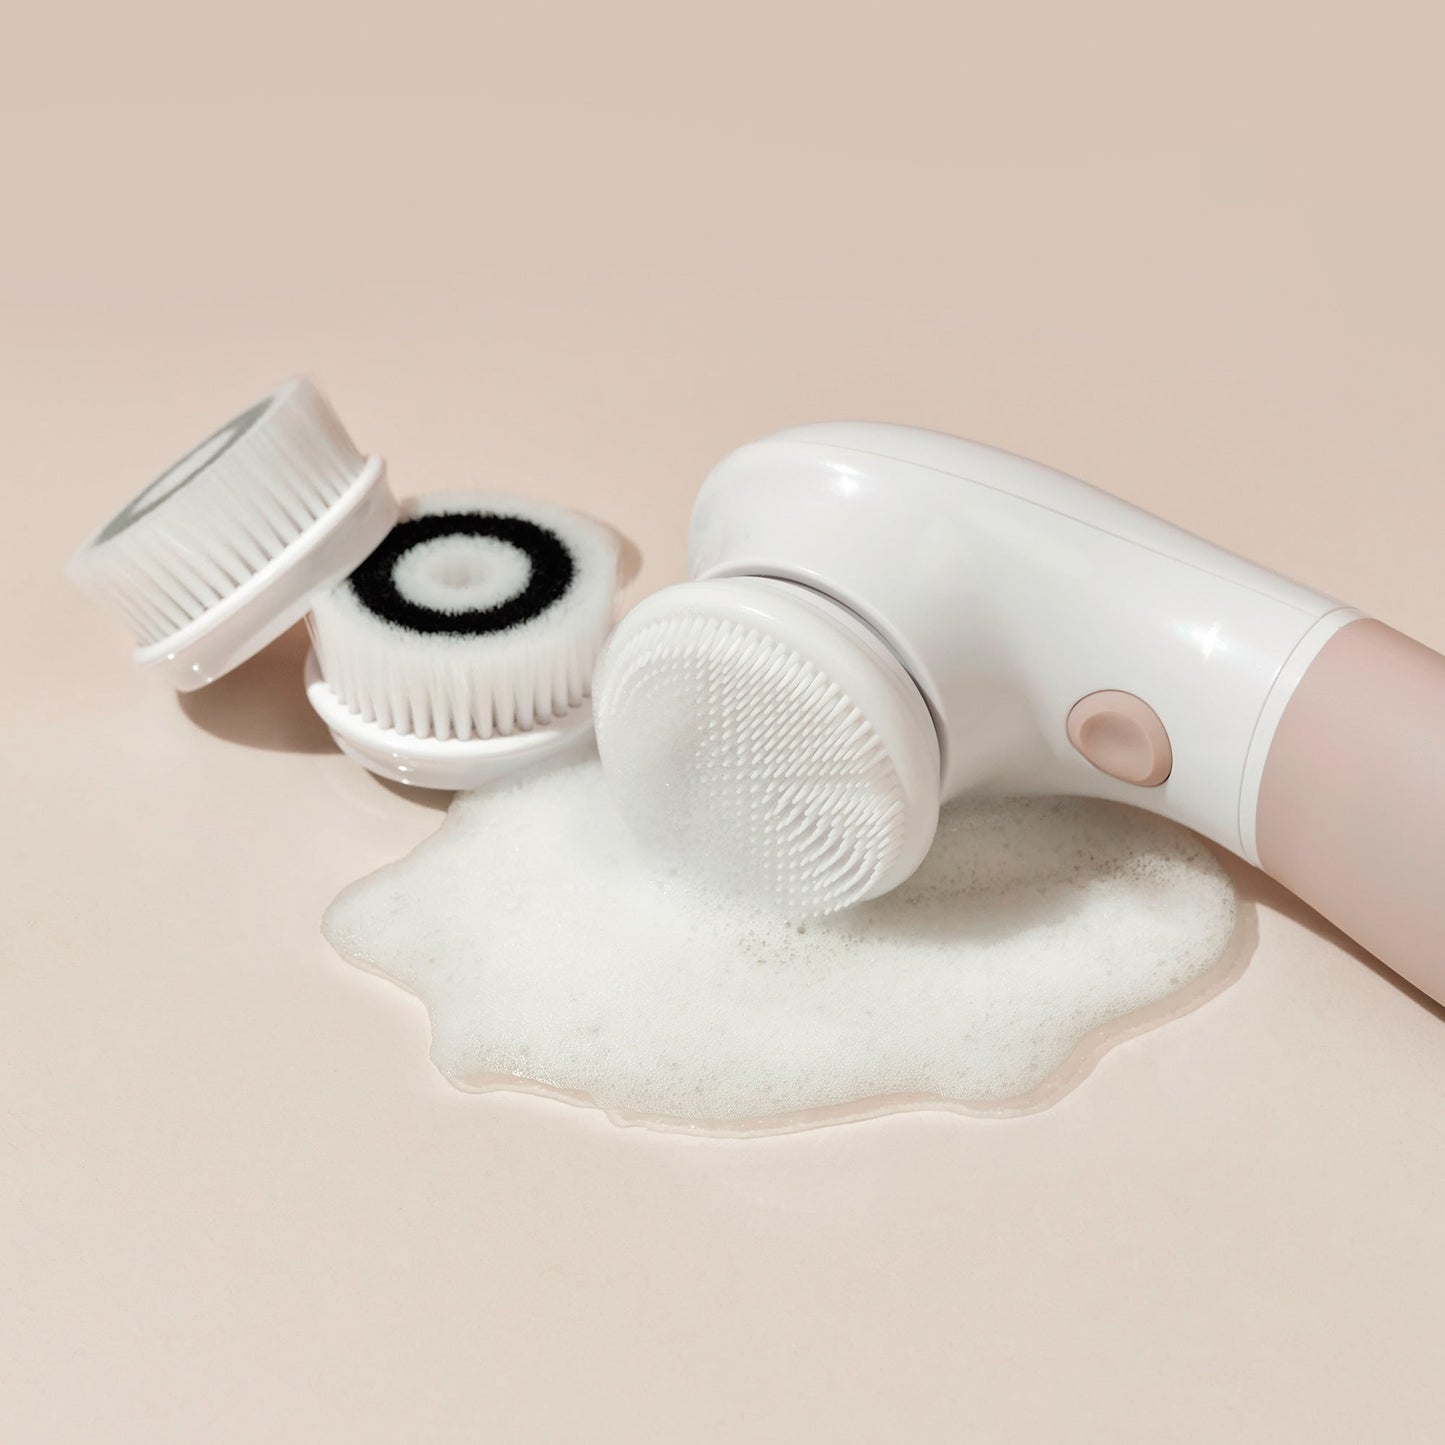 Raedia | Facial Cleansing Brush. by Vanity Planet - Lotus and Willow